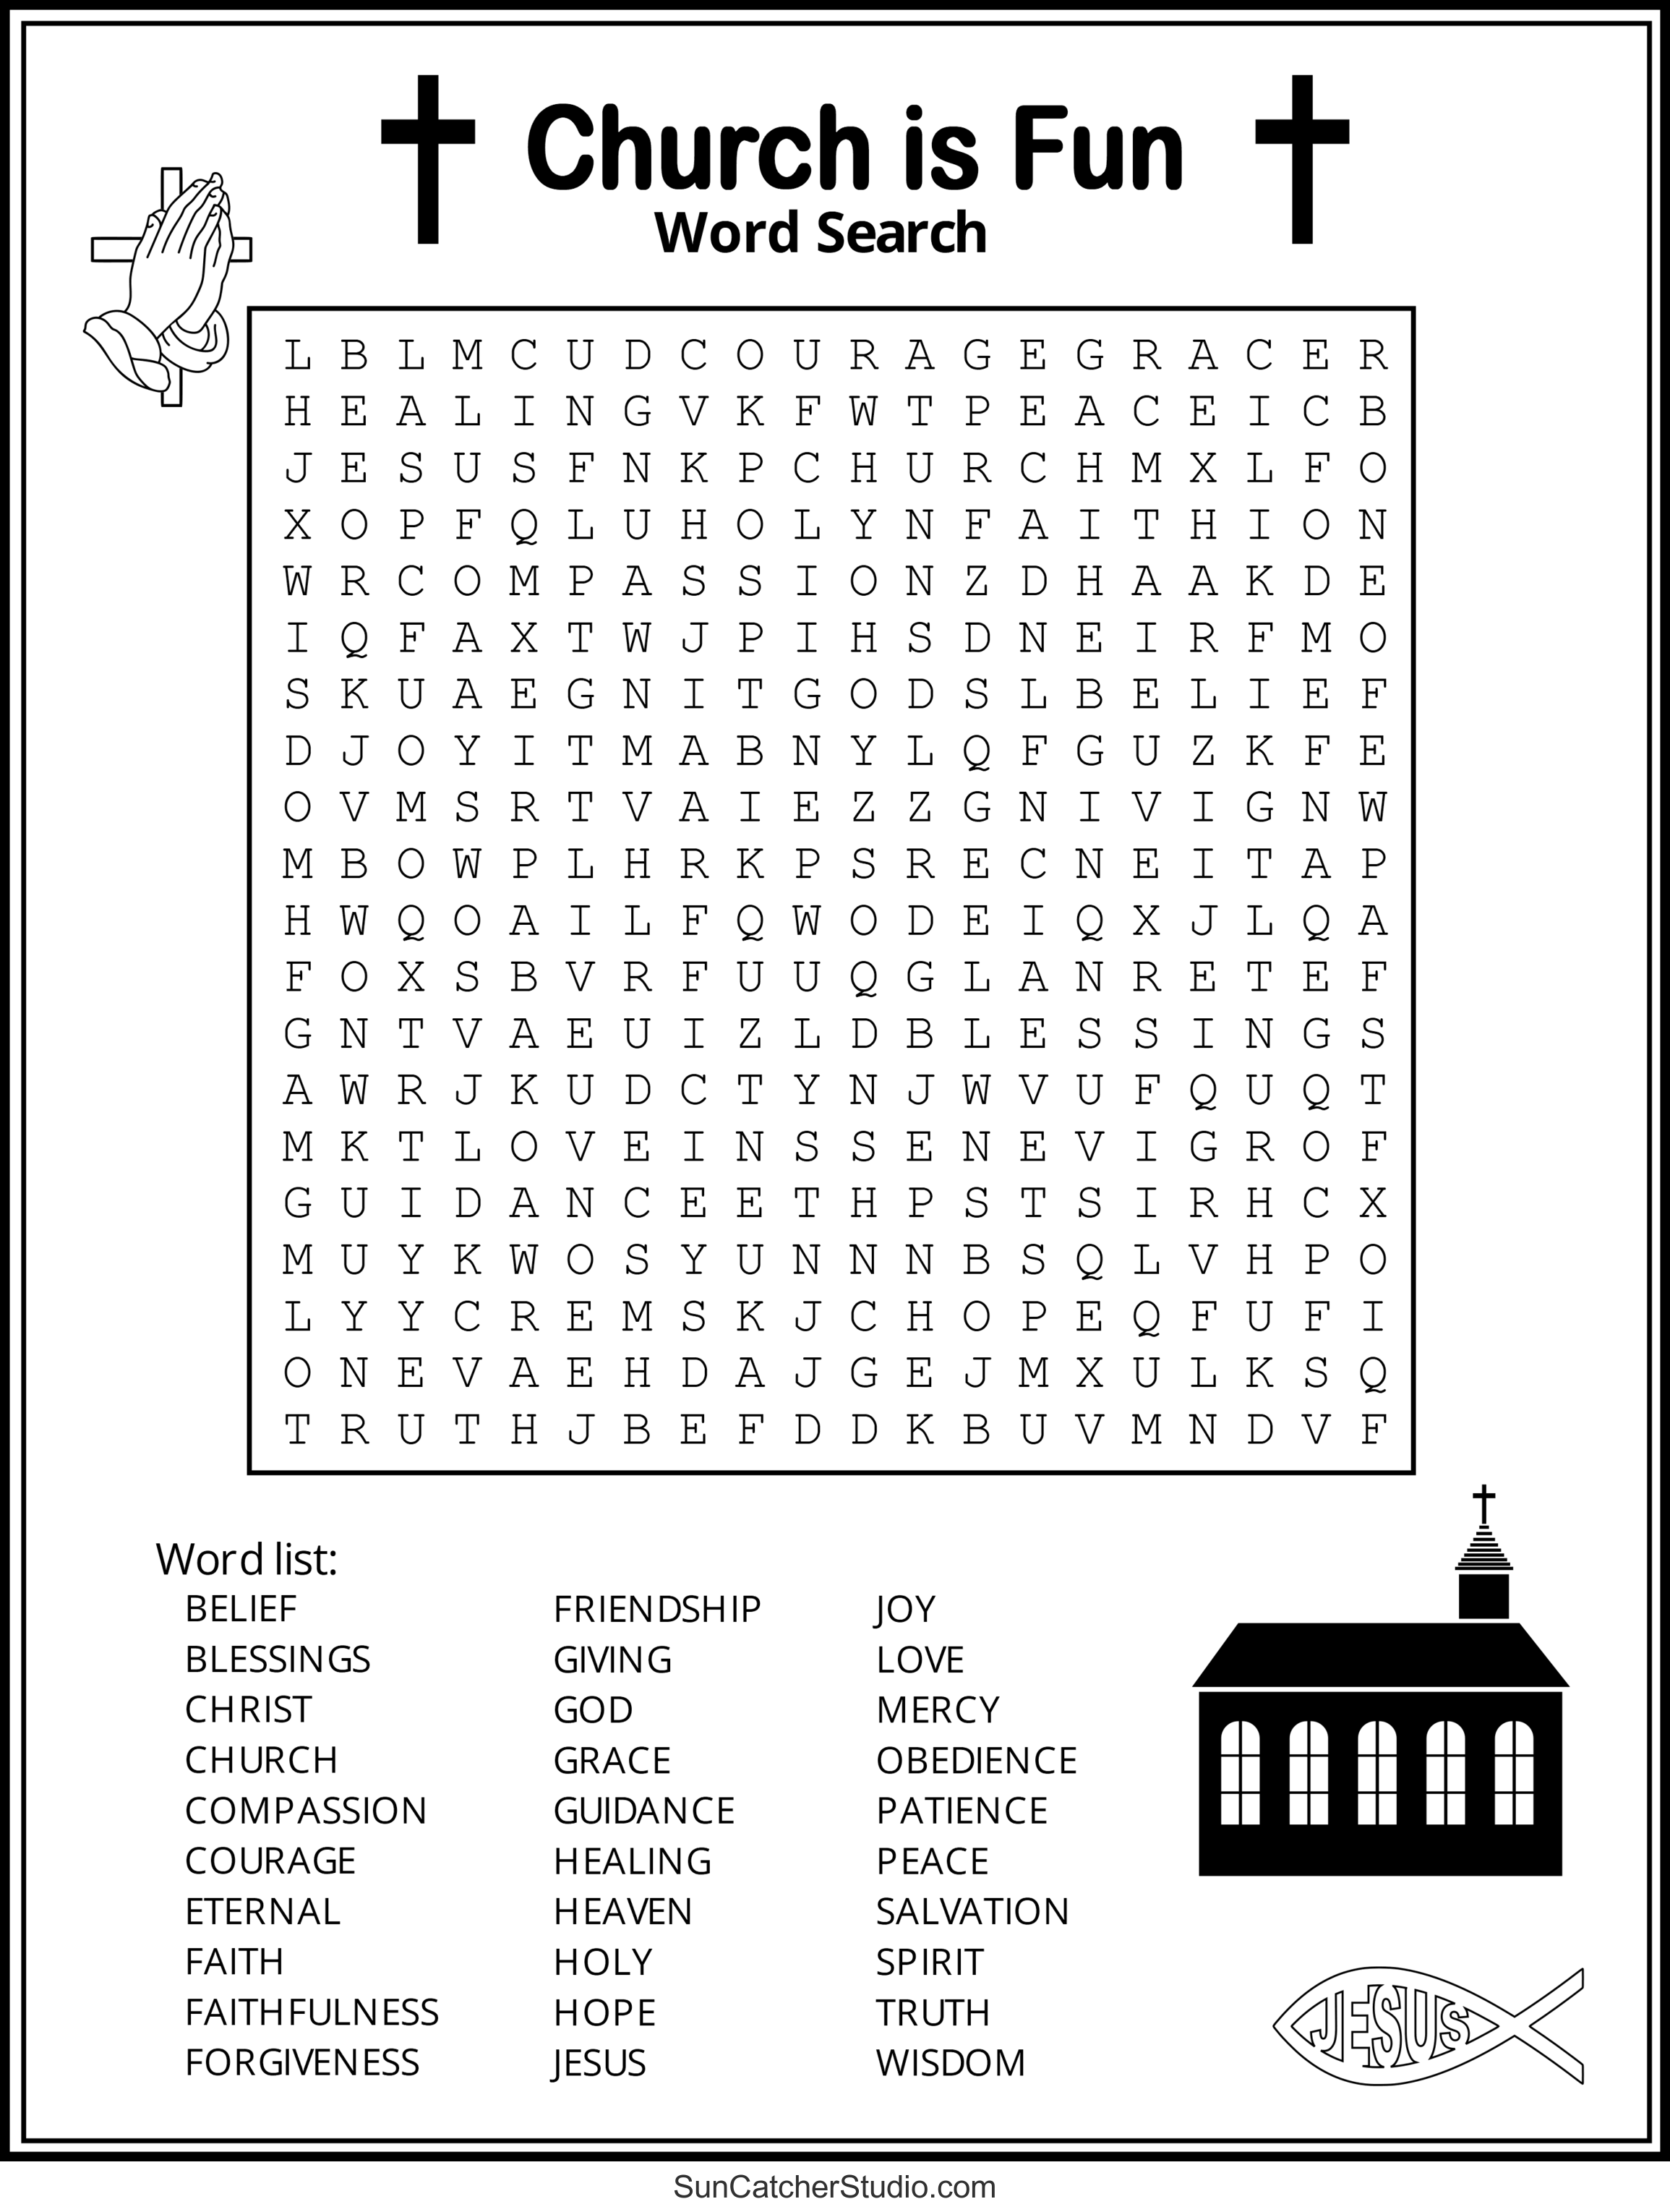 Bible Word Search Free Printable Christian Puzzles DIY Projects Patterns Monograms Designs Templates